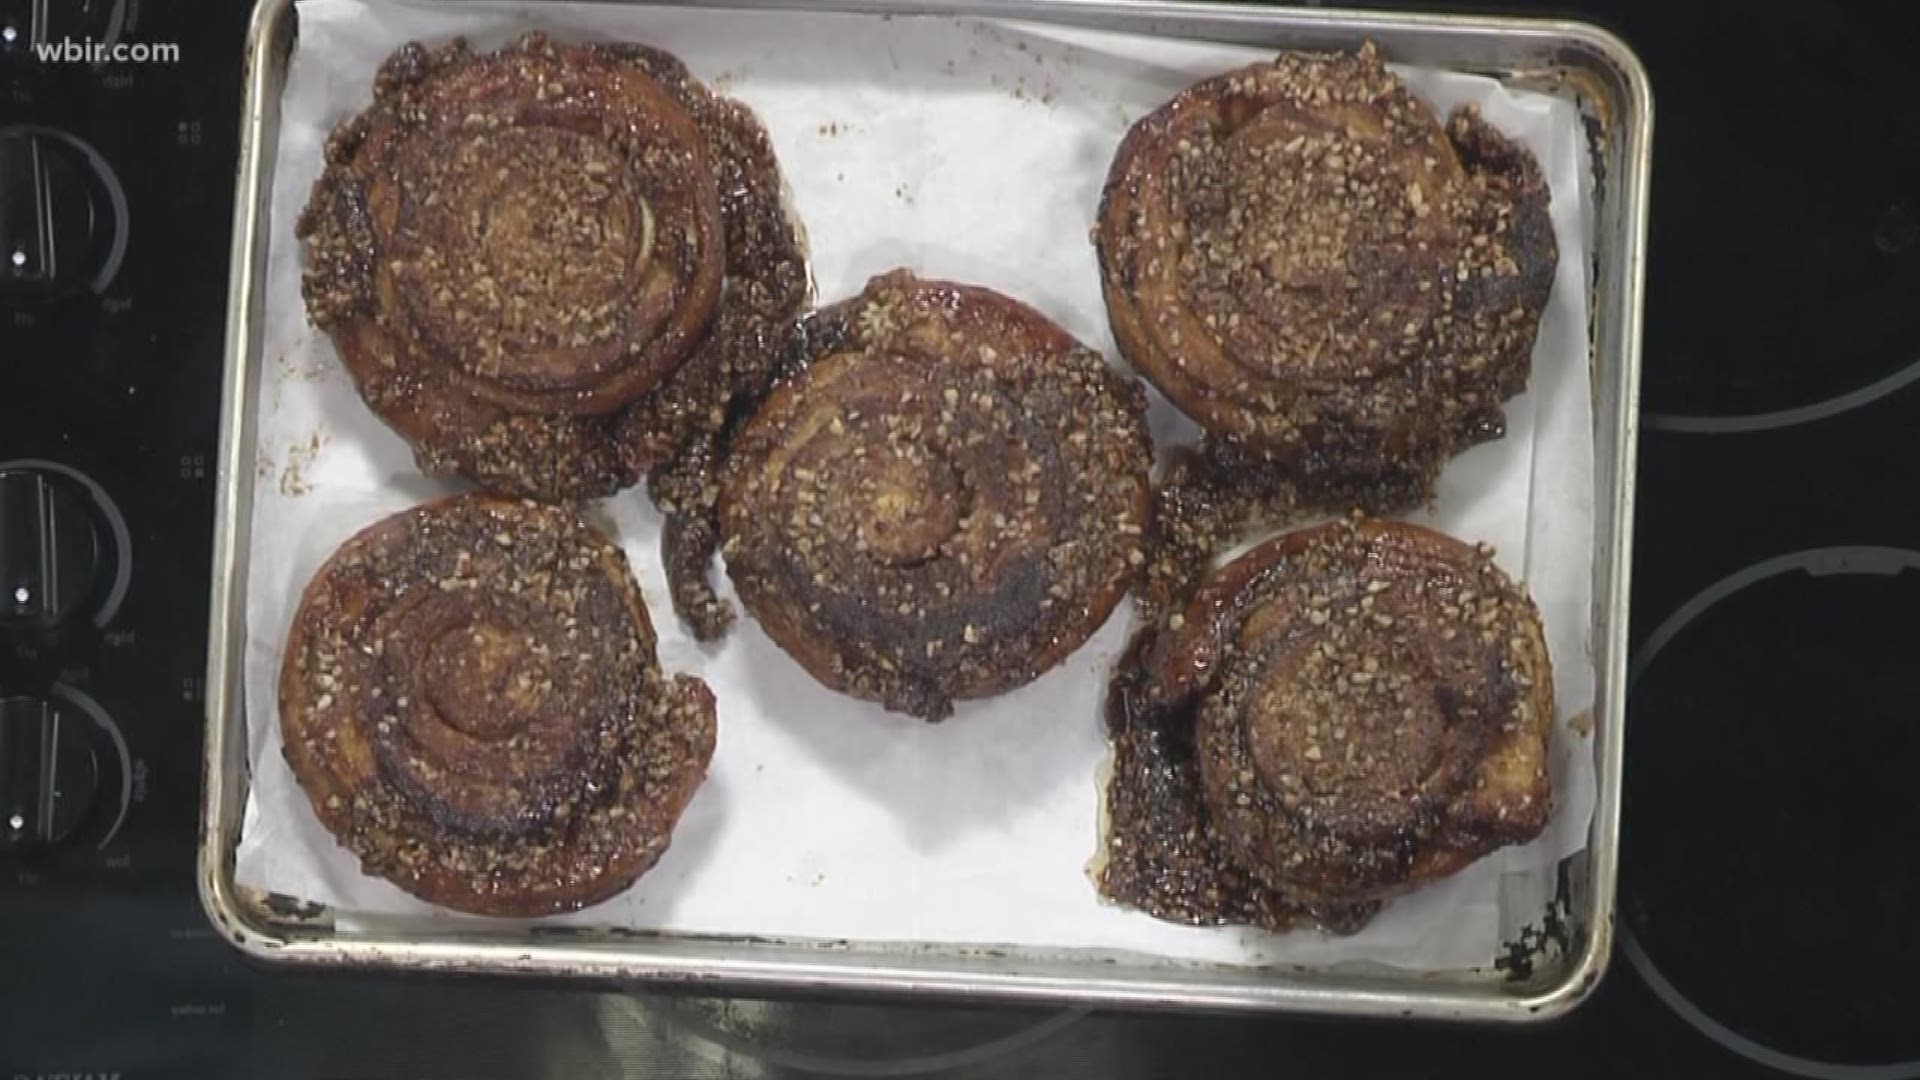 Simply Sweet Bakery shares how to make homemade sticky buns.